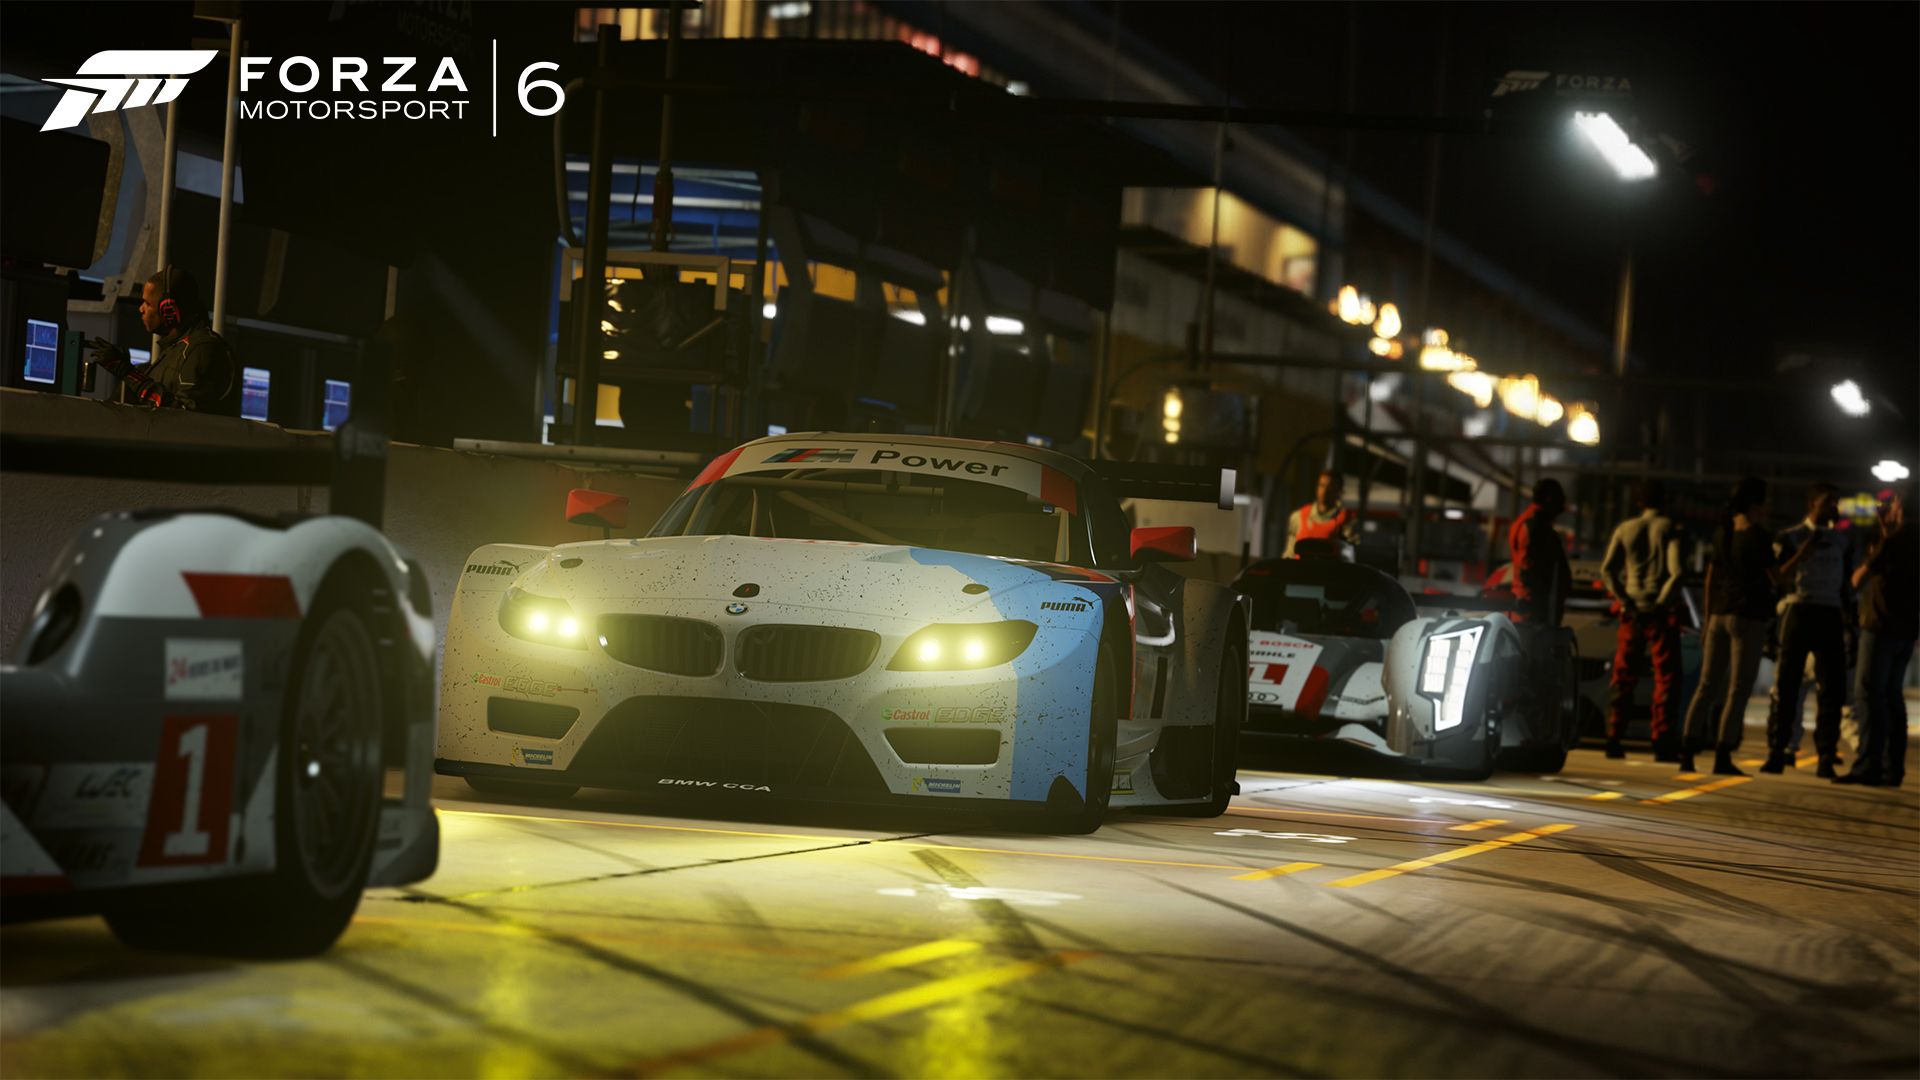 Forza Motorsport 6 hands-on: Bigger, wetter, and a new card-based